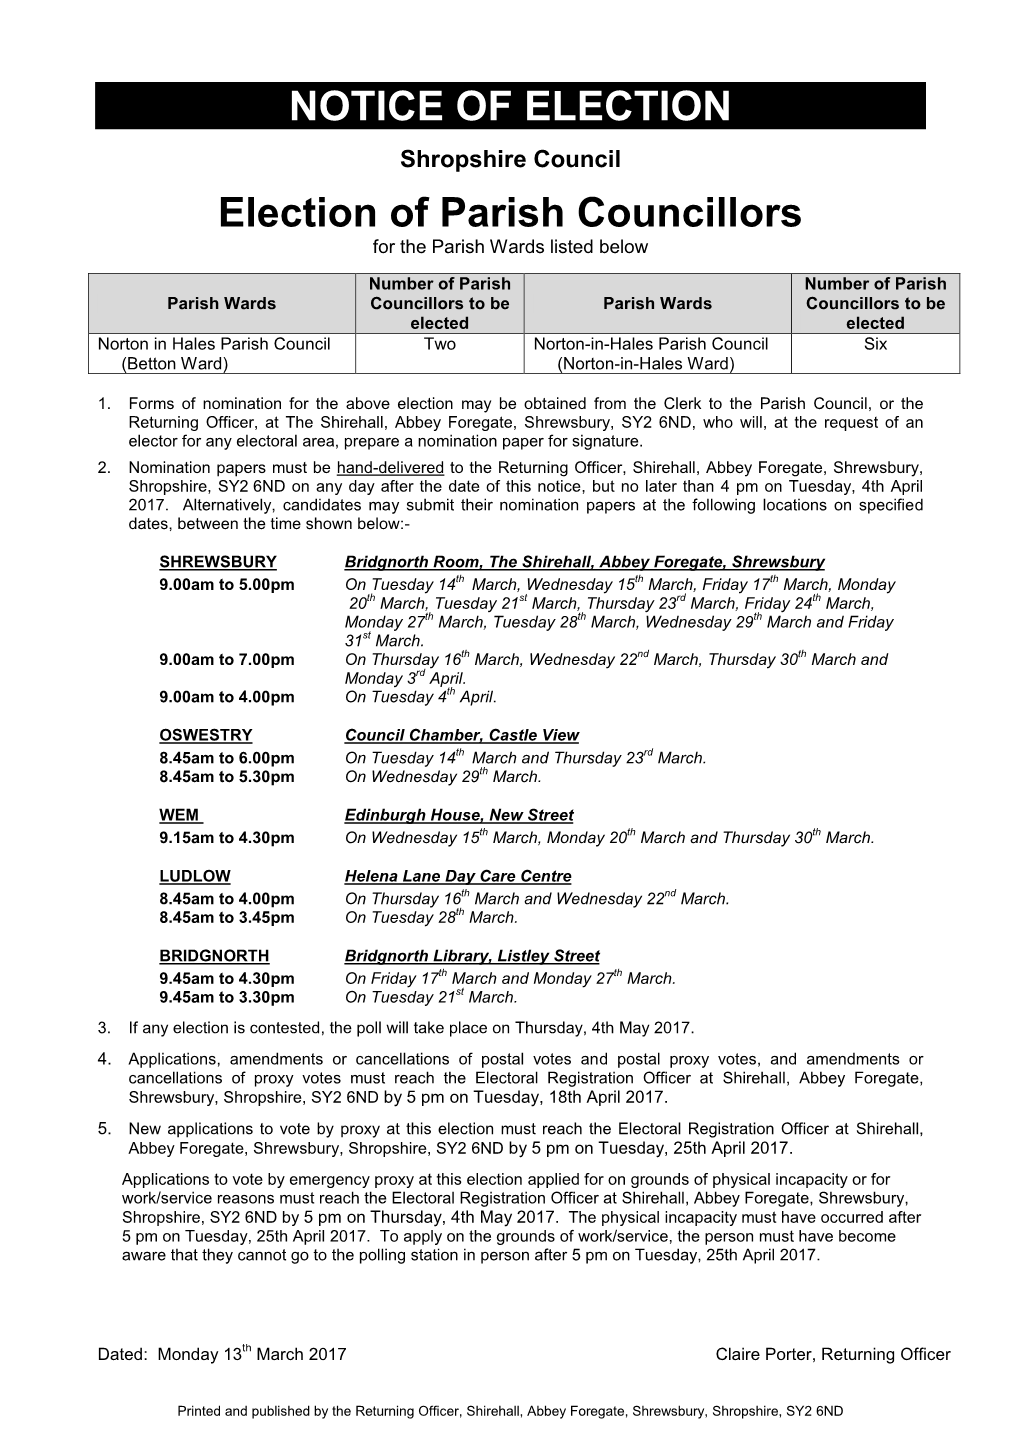 Election of Parish Councillors for the Parish Wards Listed Below